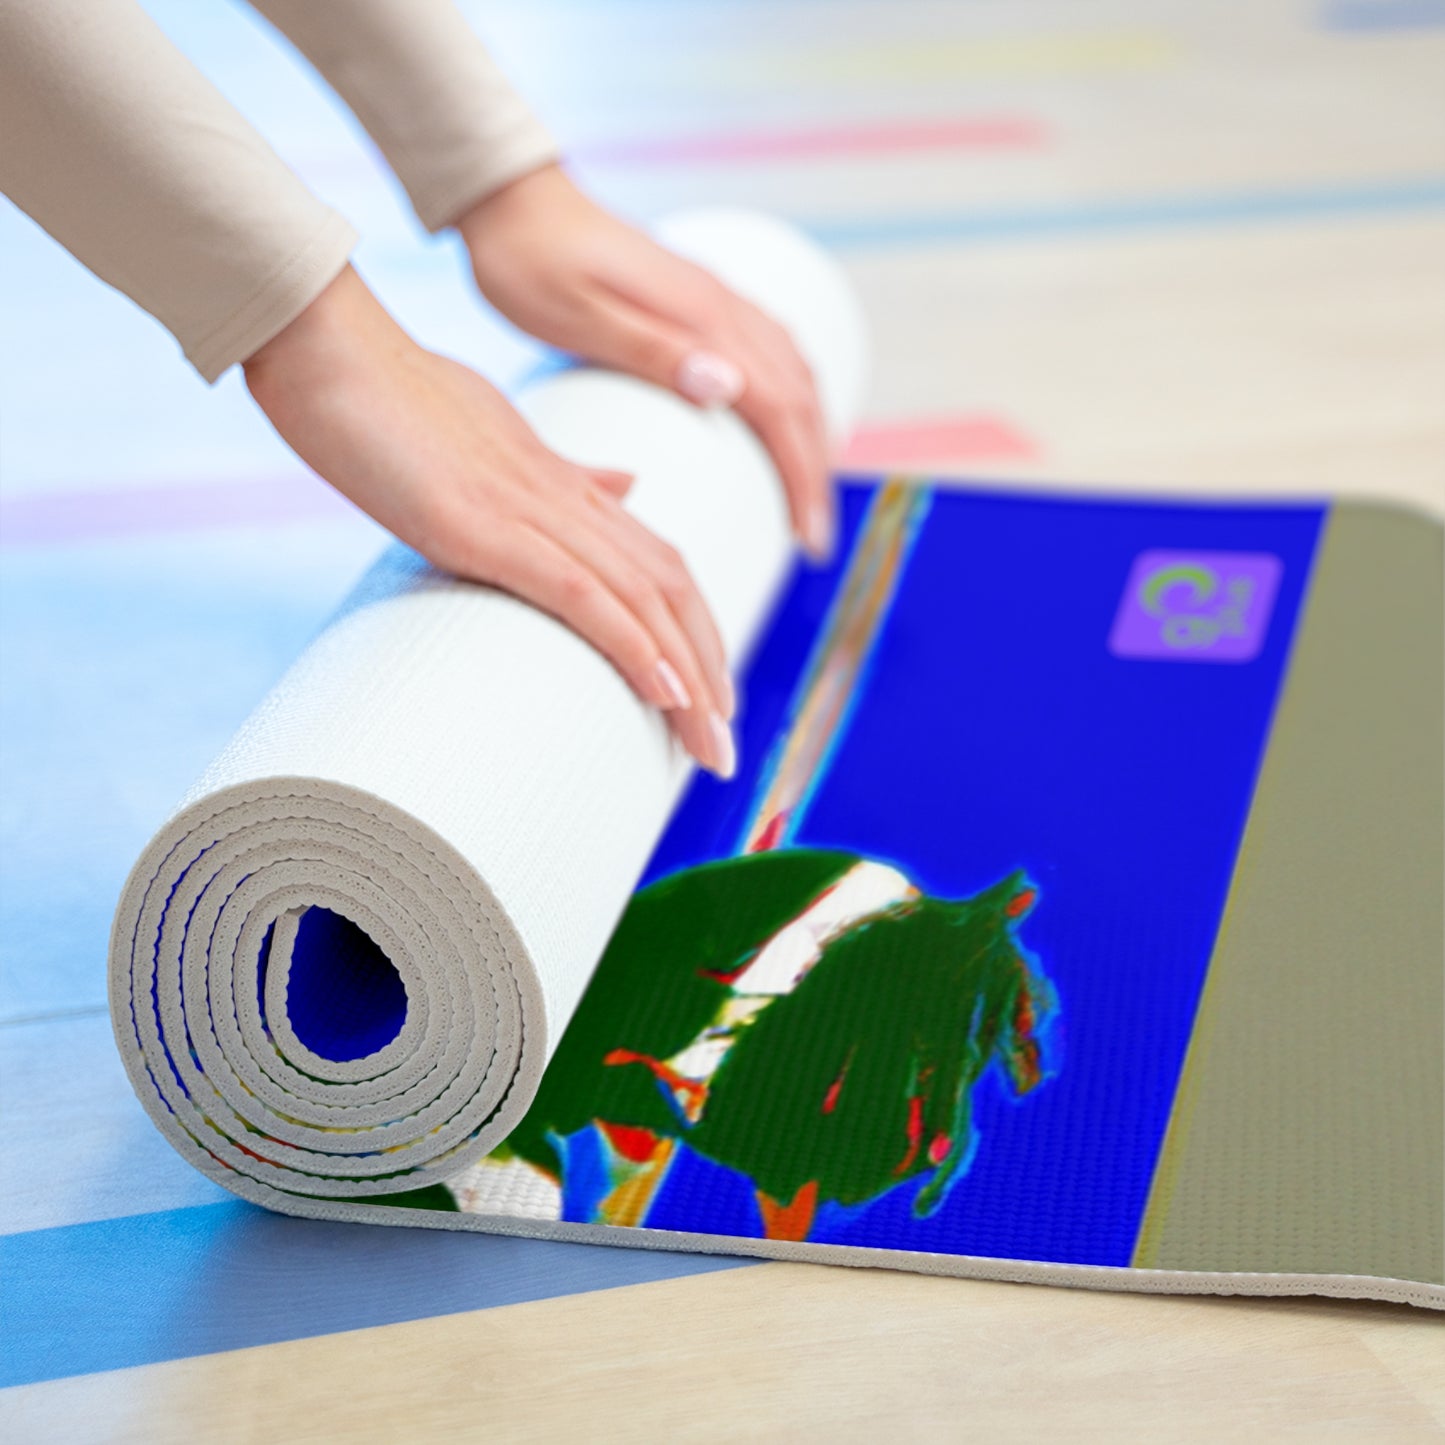 "The Moment in Motion: An Abstract Sports Image" - Go Plus Foam Yoga Mat